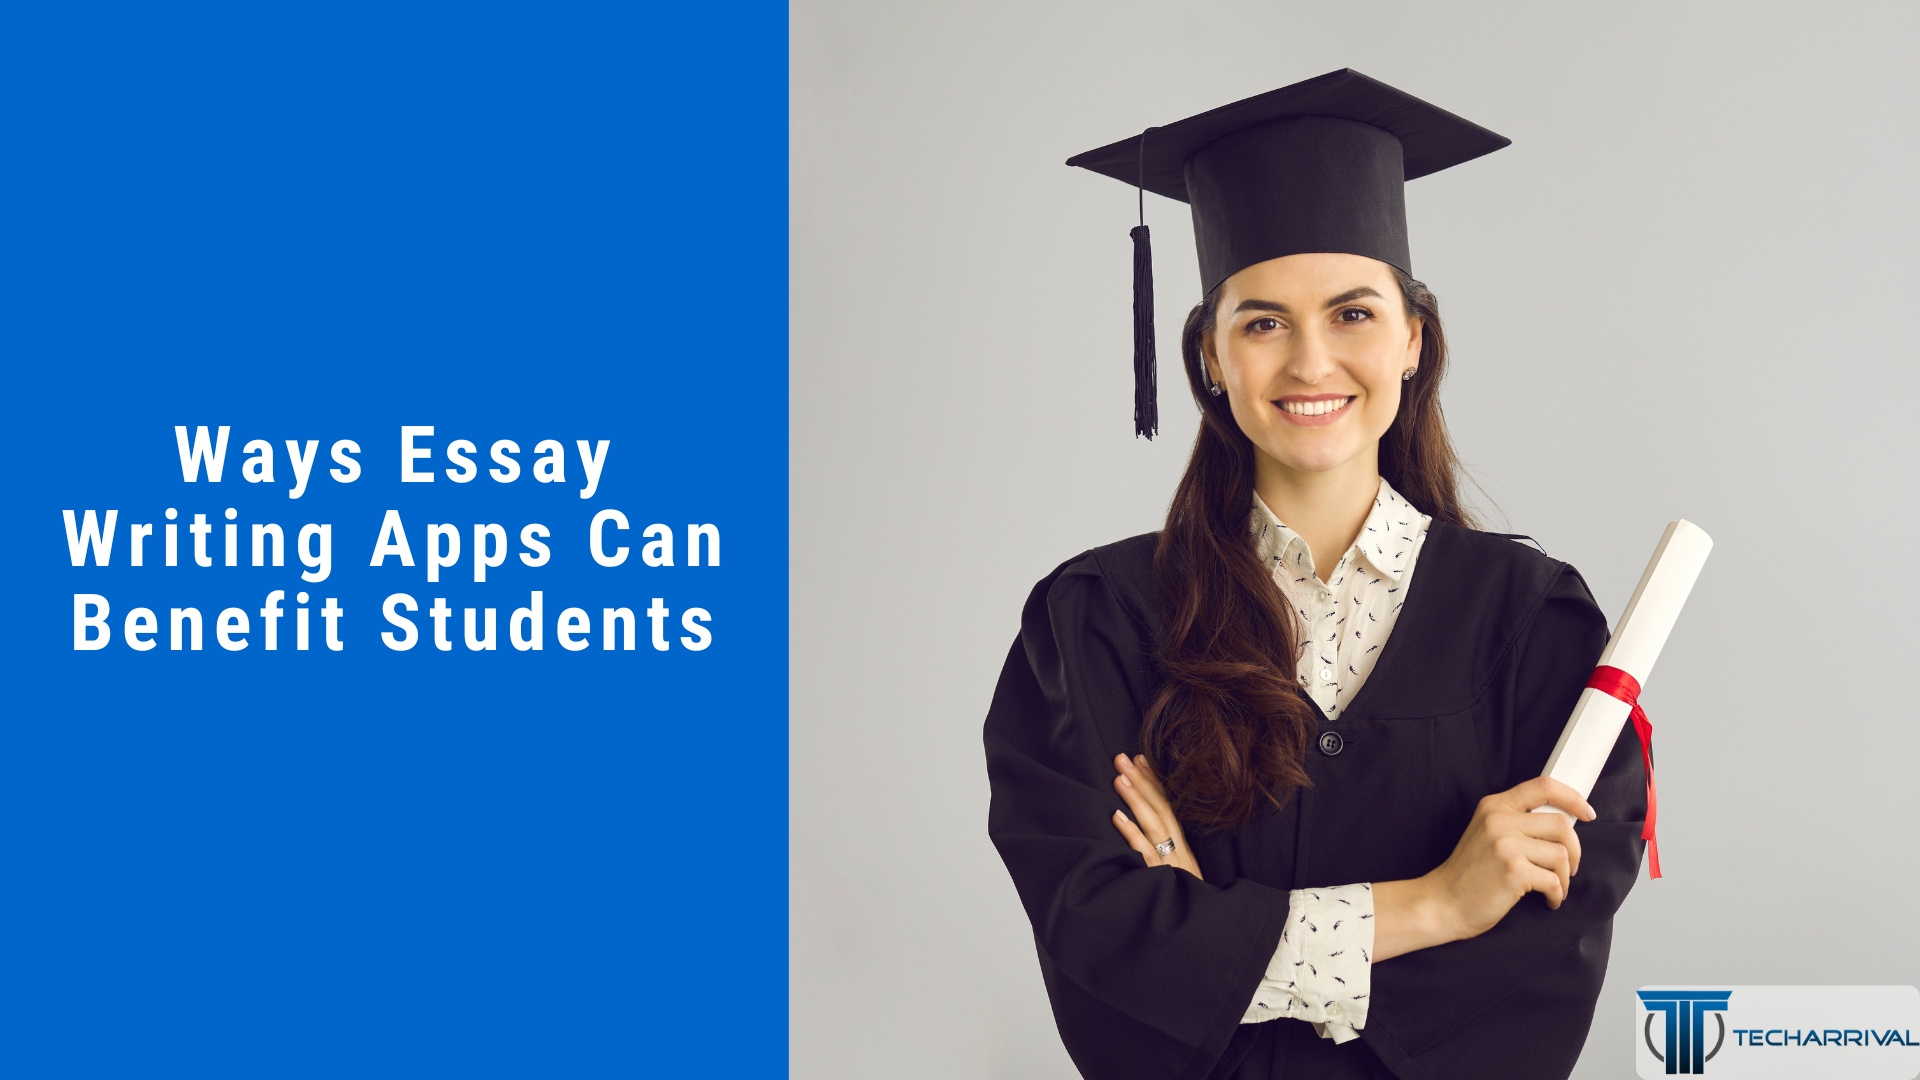 5 Ways Essay Writing Apps Can Benefit Students